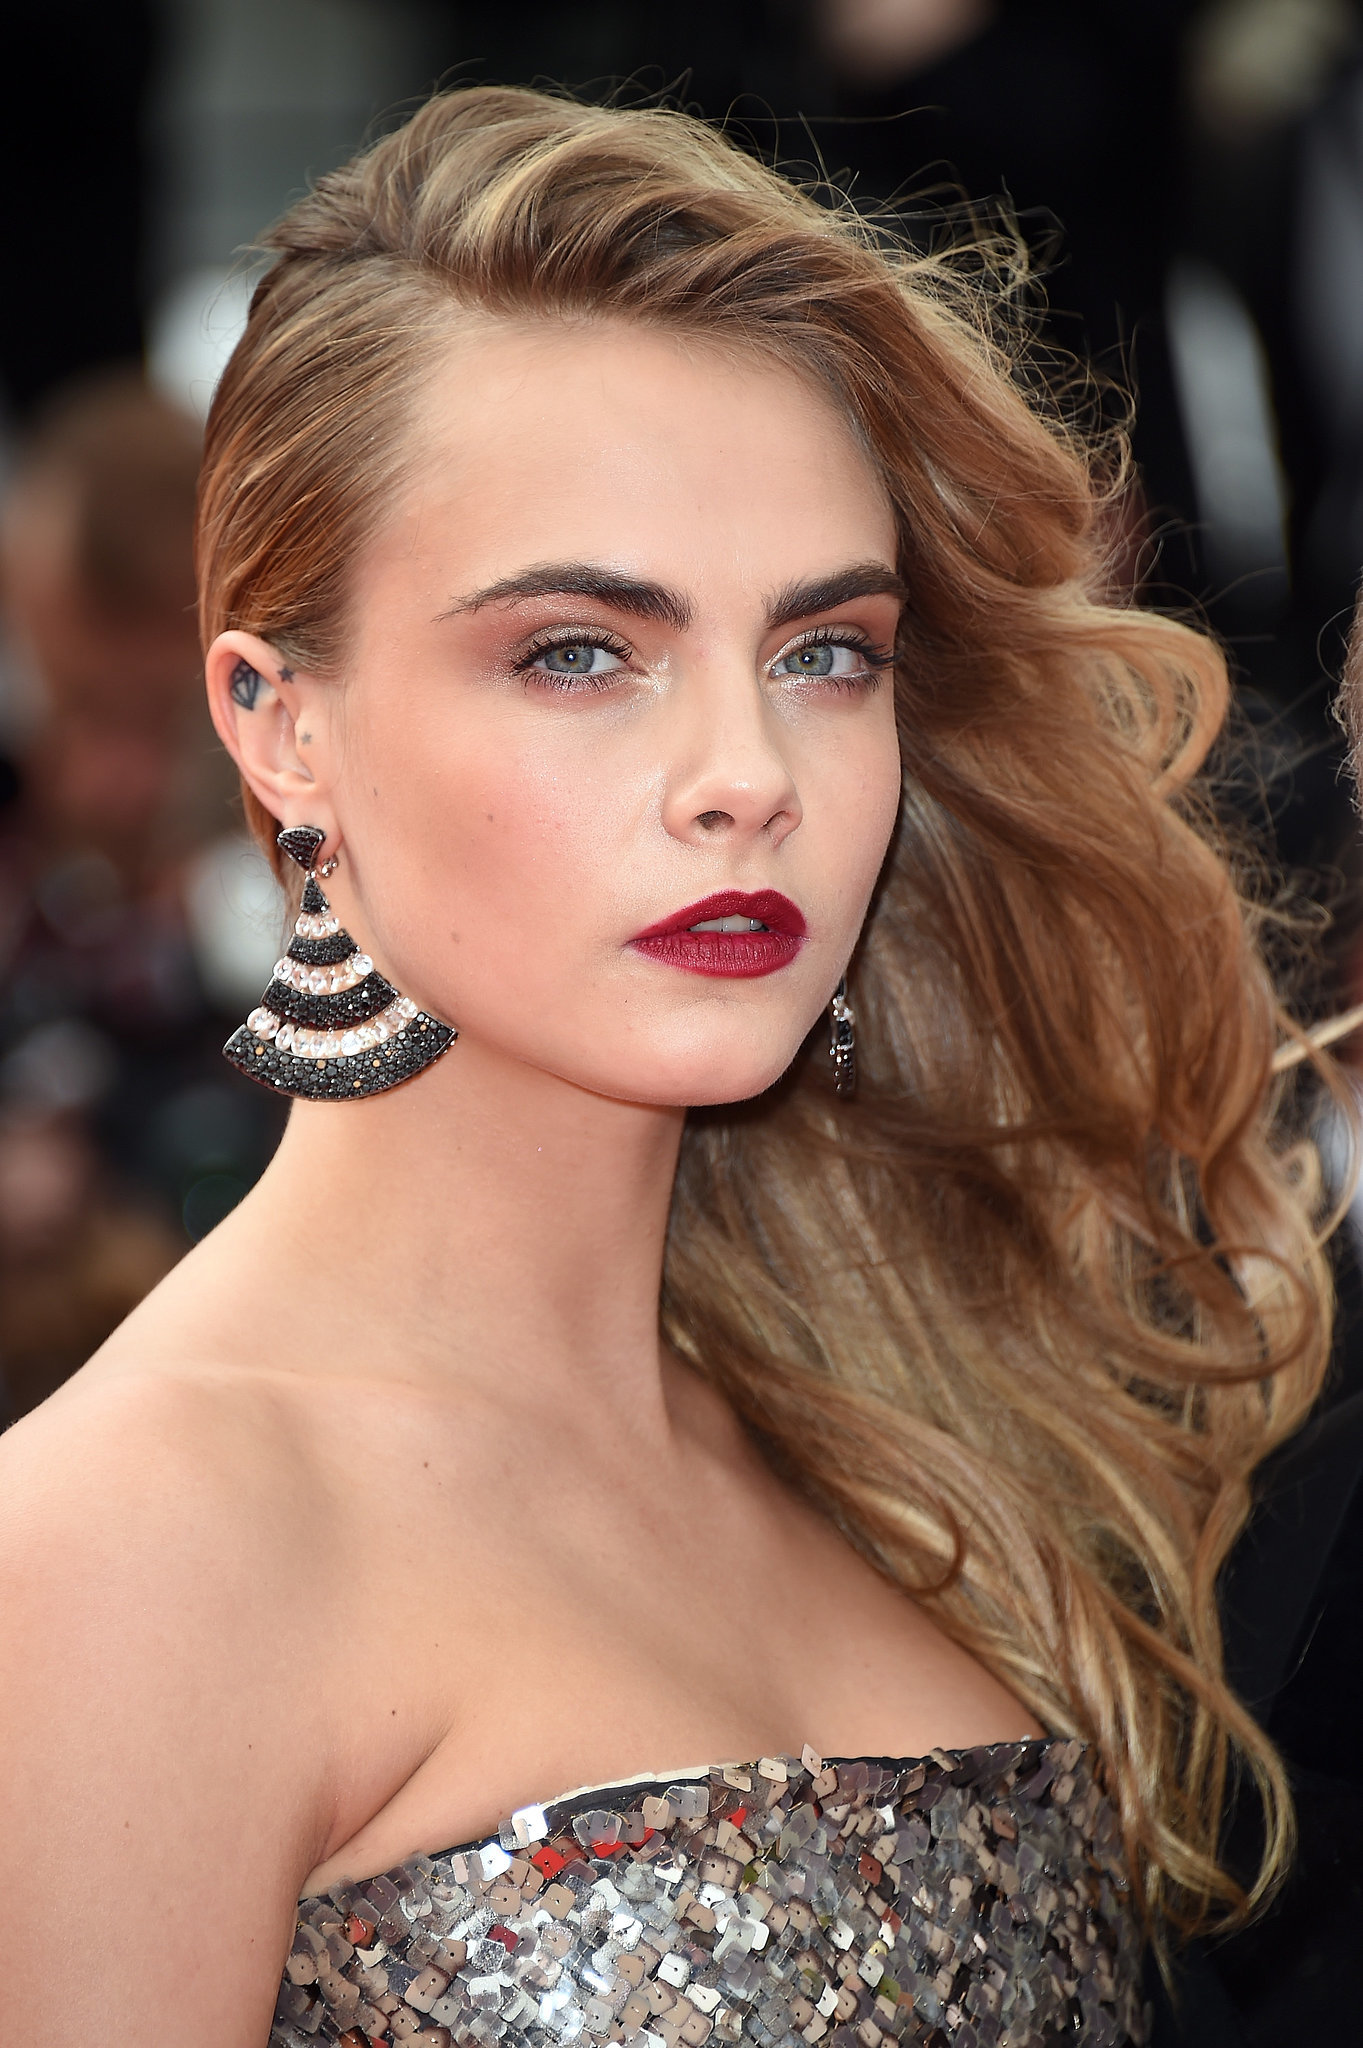 One Side Hairstyle   A New Trend From The Red Carpet